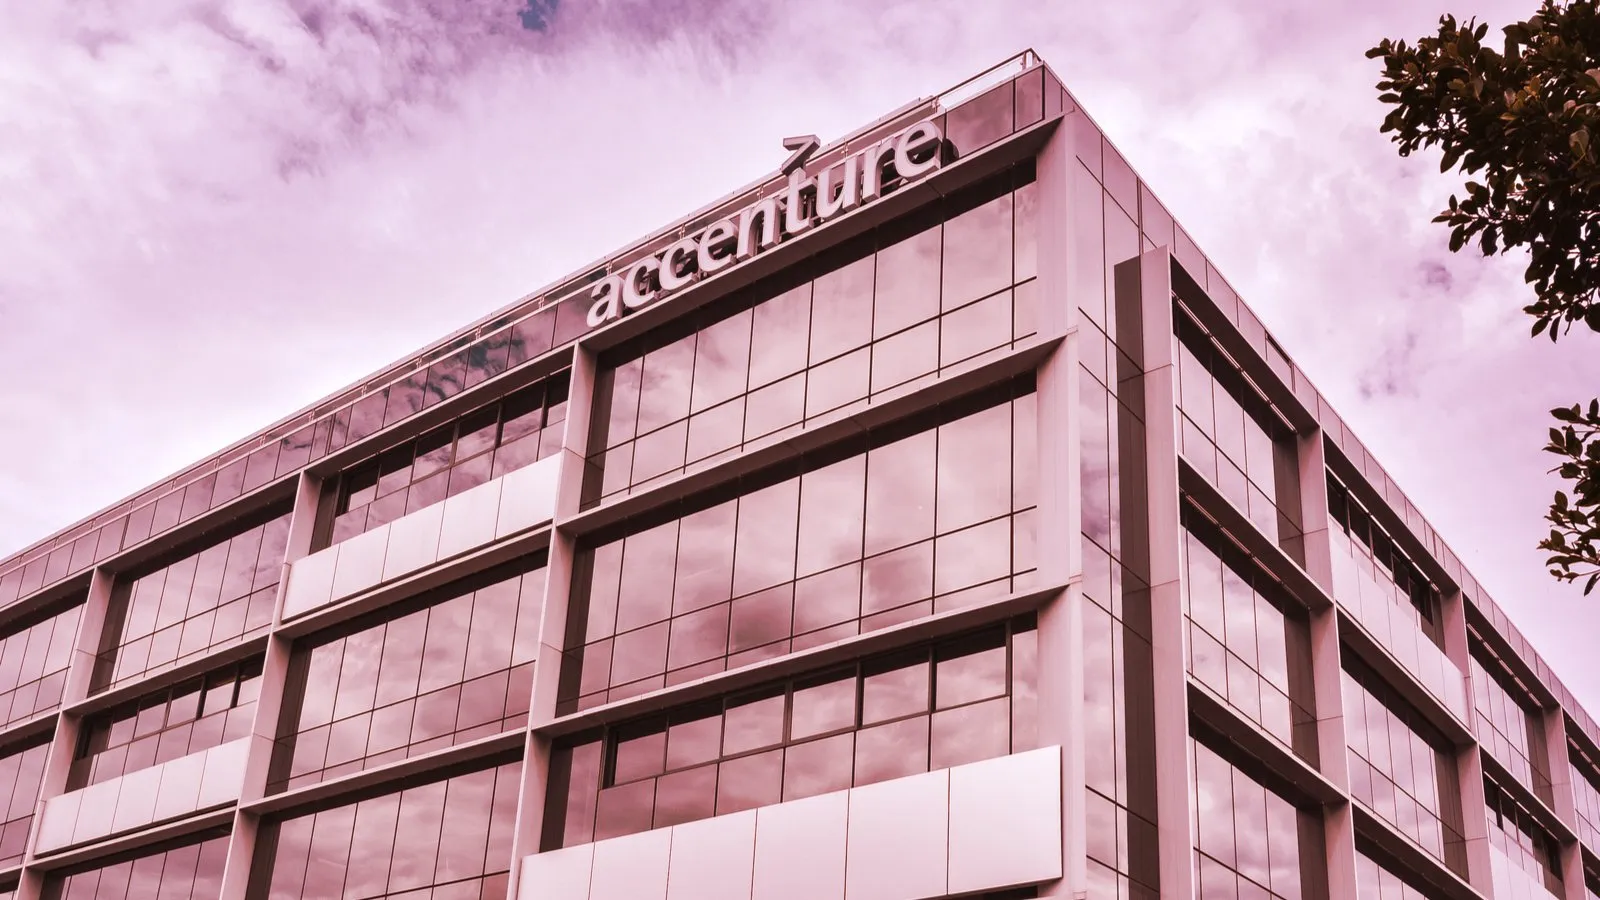 Accenture is an IT consulting firm. Image: Shutterstock